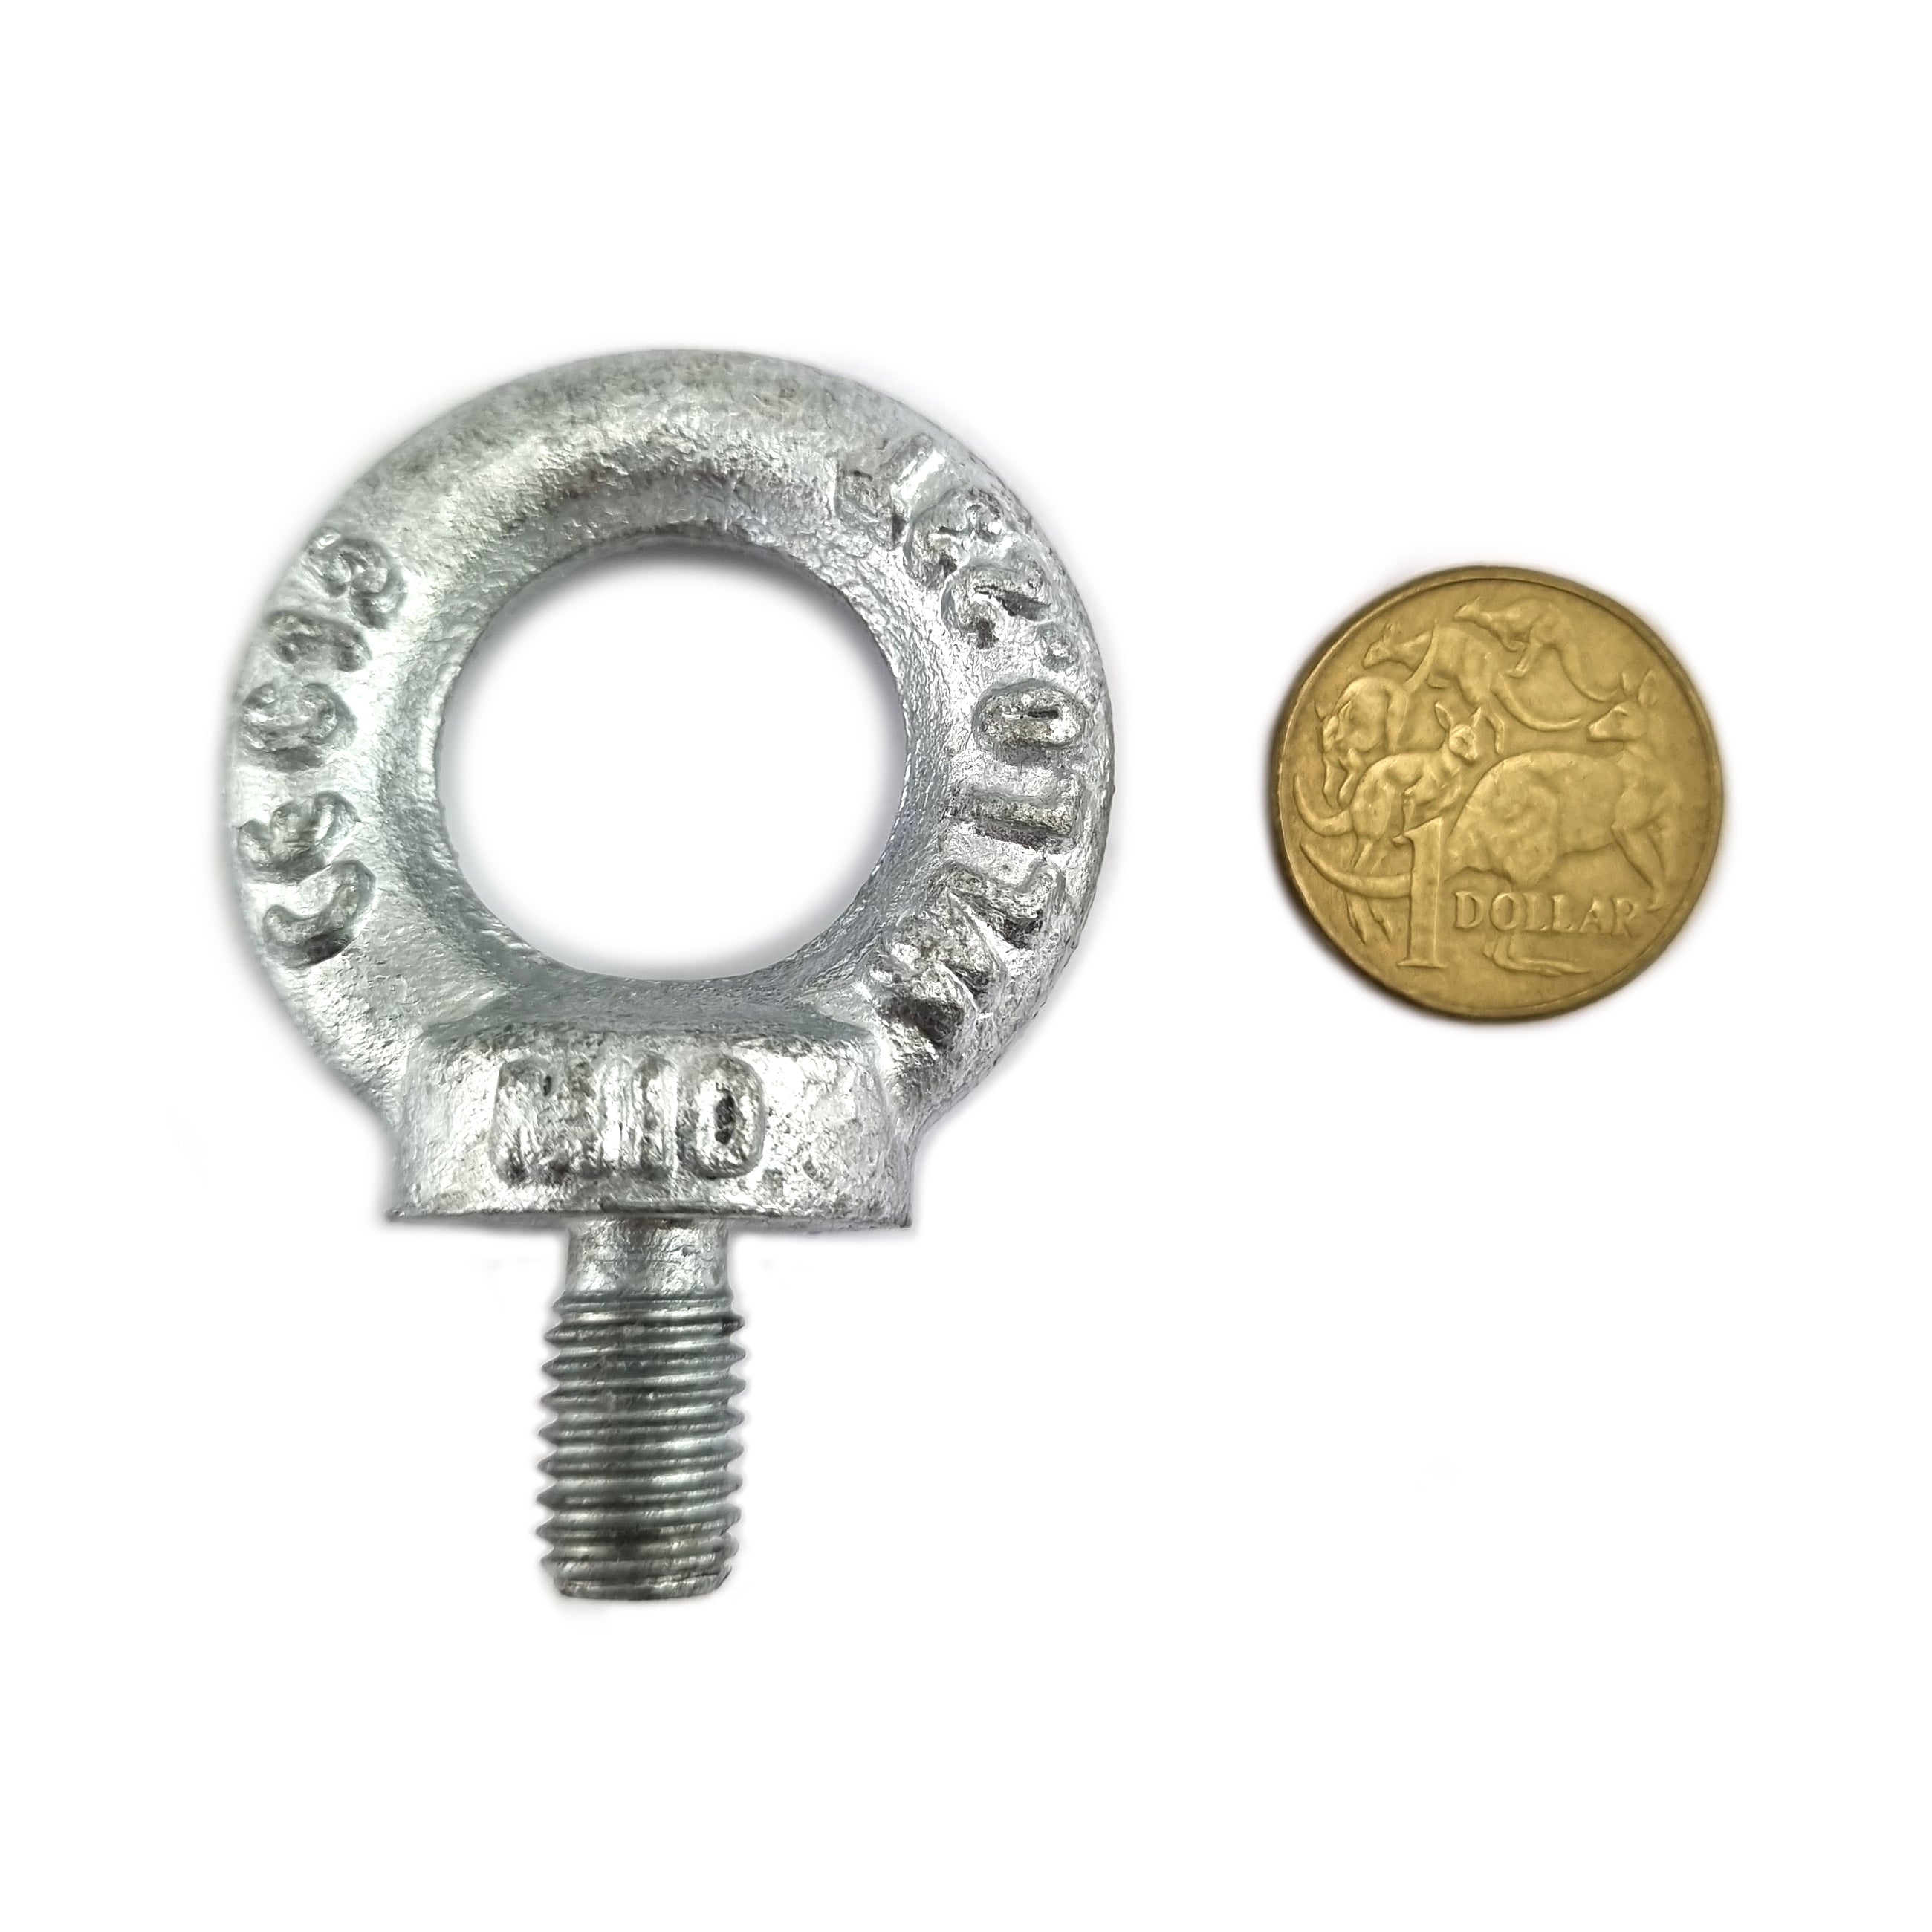 Lifting Eye Bolt Galvanised, Size 10mm x 10mm Thread. Shop hardware bolts online. Australia wide shipping.